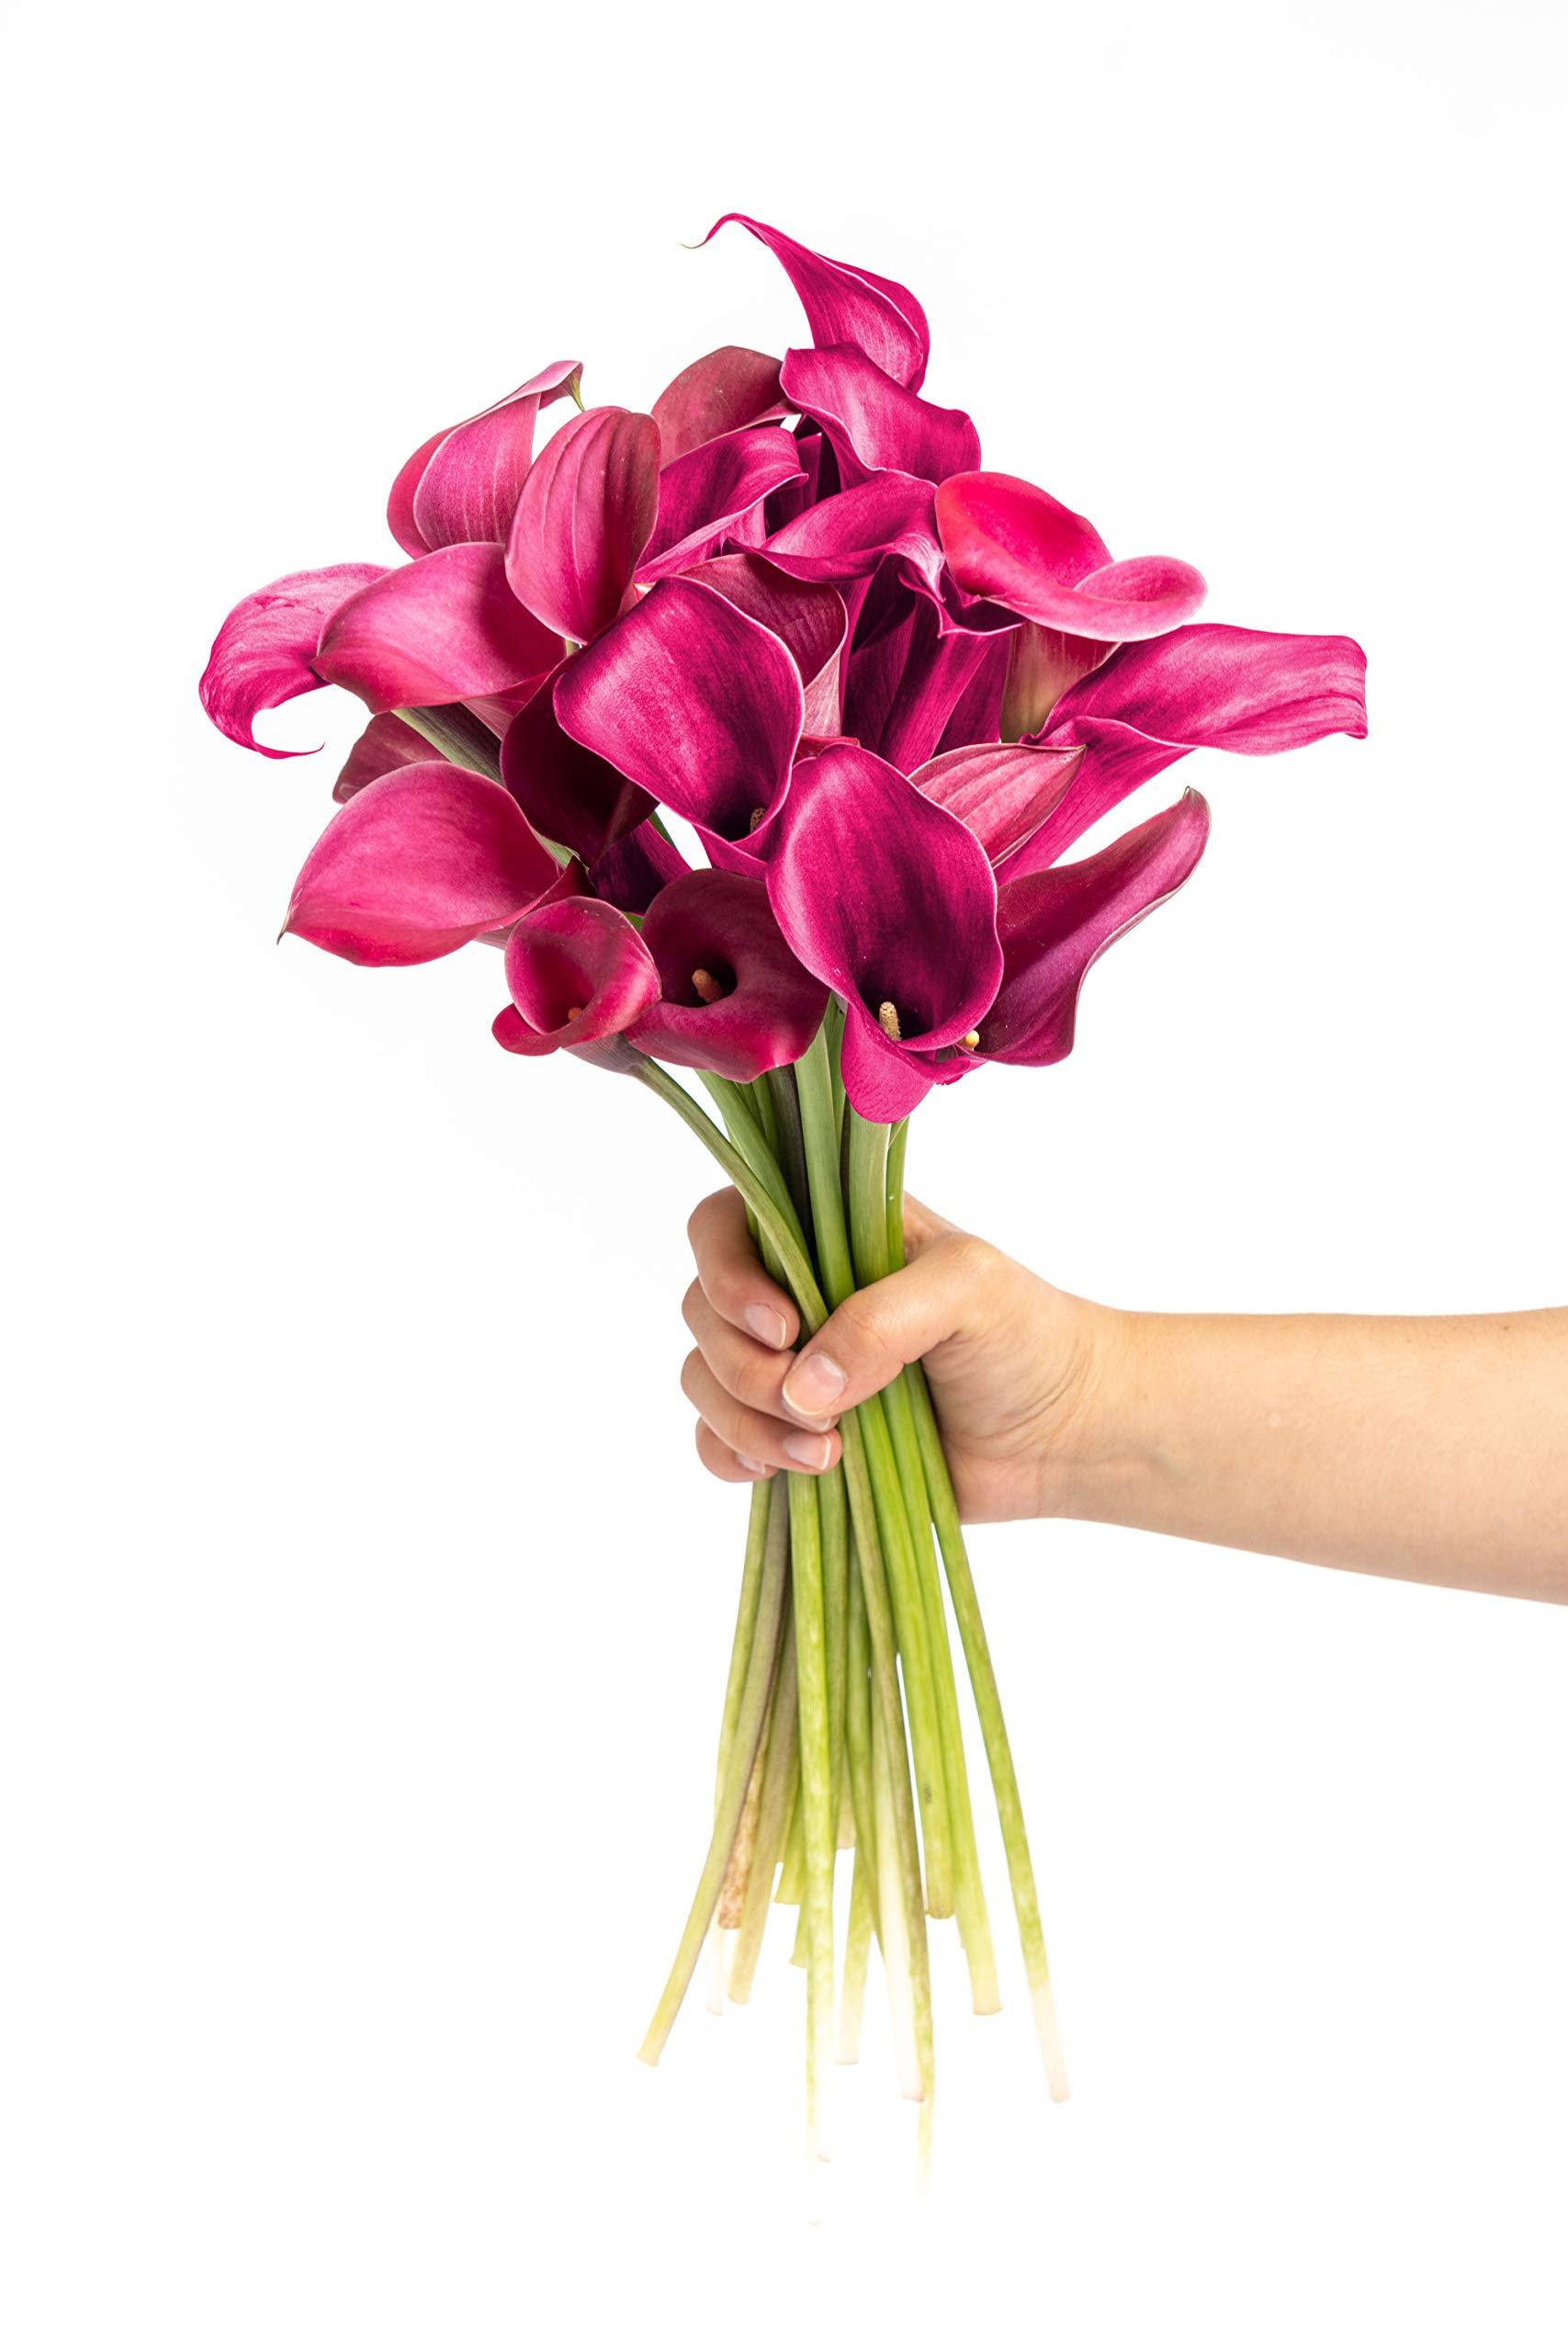 Greenchoice Flowers - Fresh Mini Calla Lilies, Flower Bouquet, Fresh Flowers for Delivery, Birthday Flowers, Flowers for Mother's Day, Flower B...